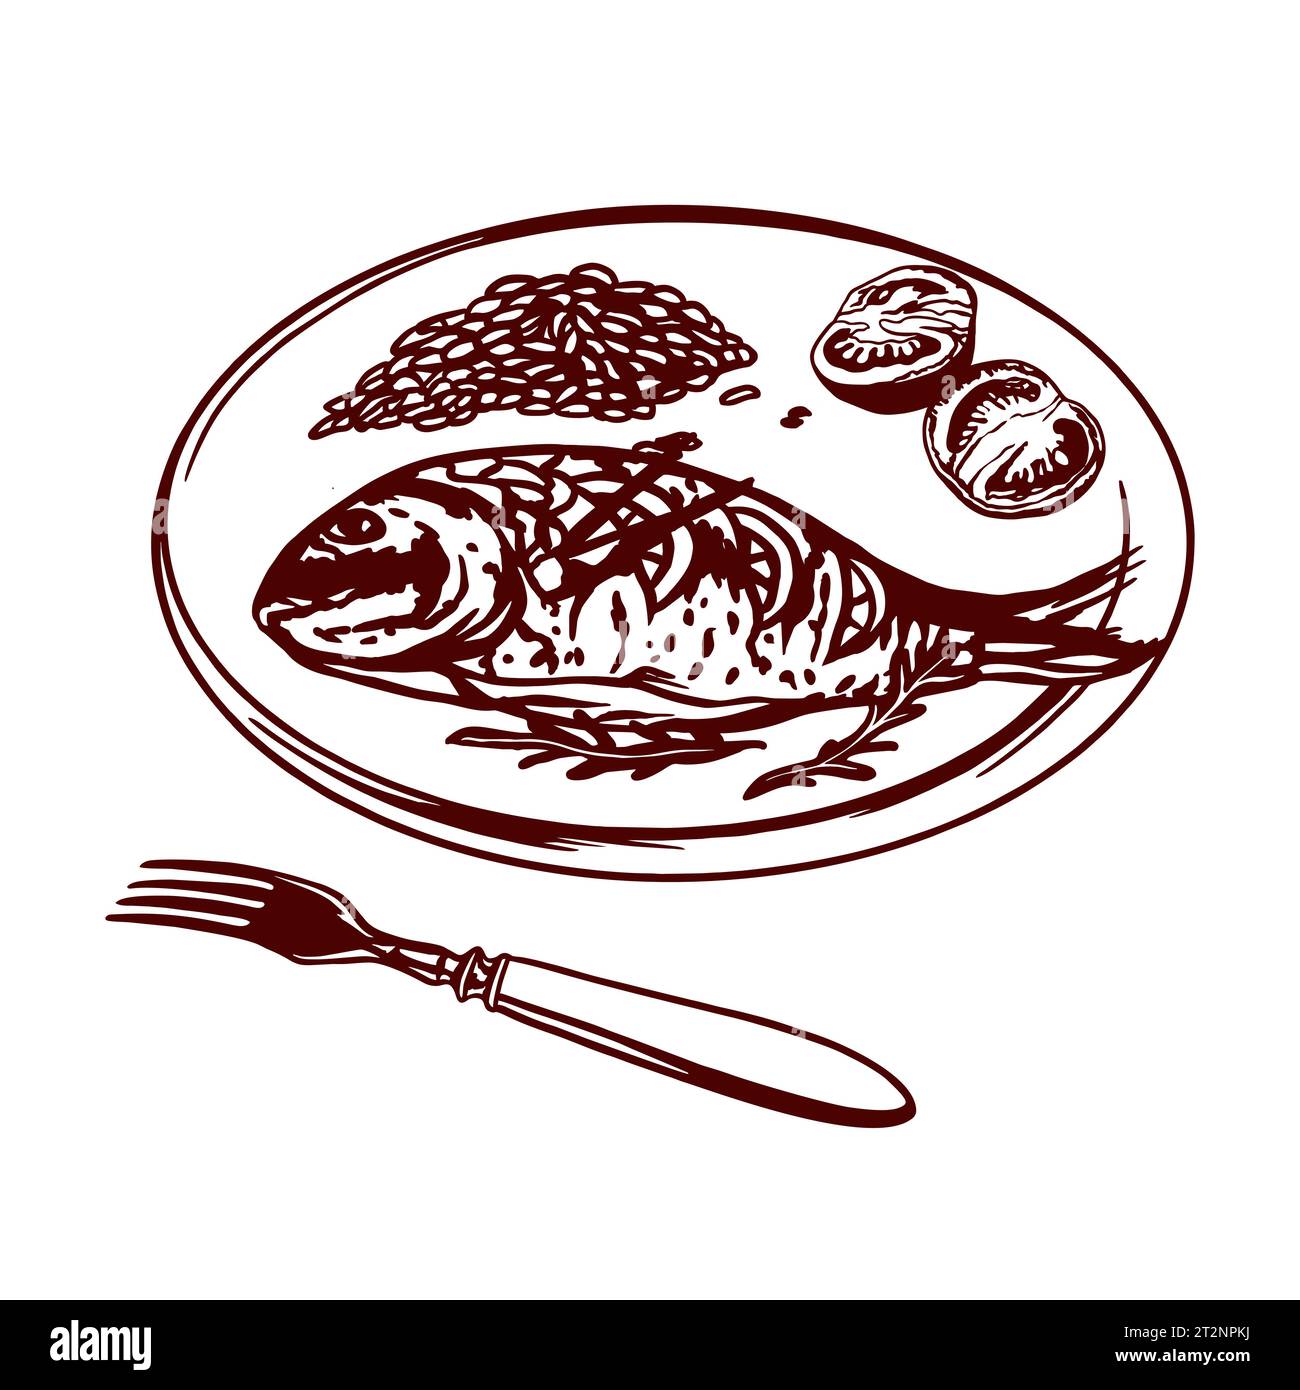 Fish, rice, tomatoes on a plate, fork. Vector illustration of food in graphic style. Menus of restaurants, cafes, food labels, covers, cards. Stock Vector